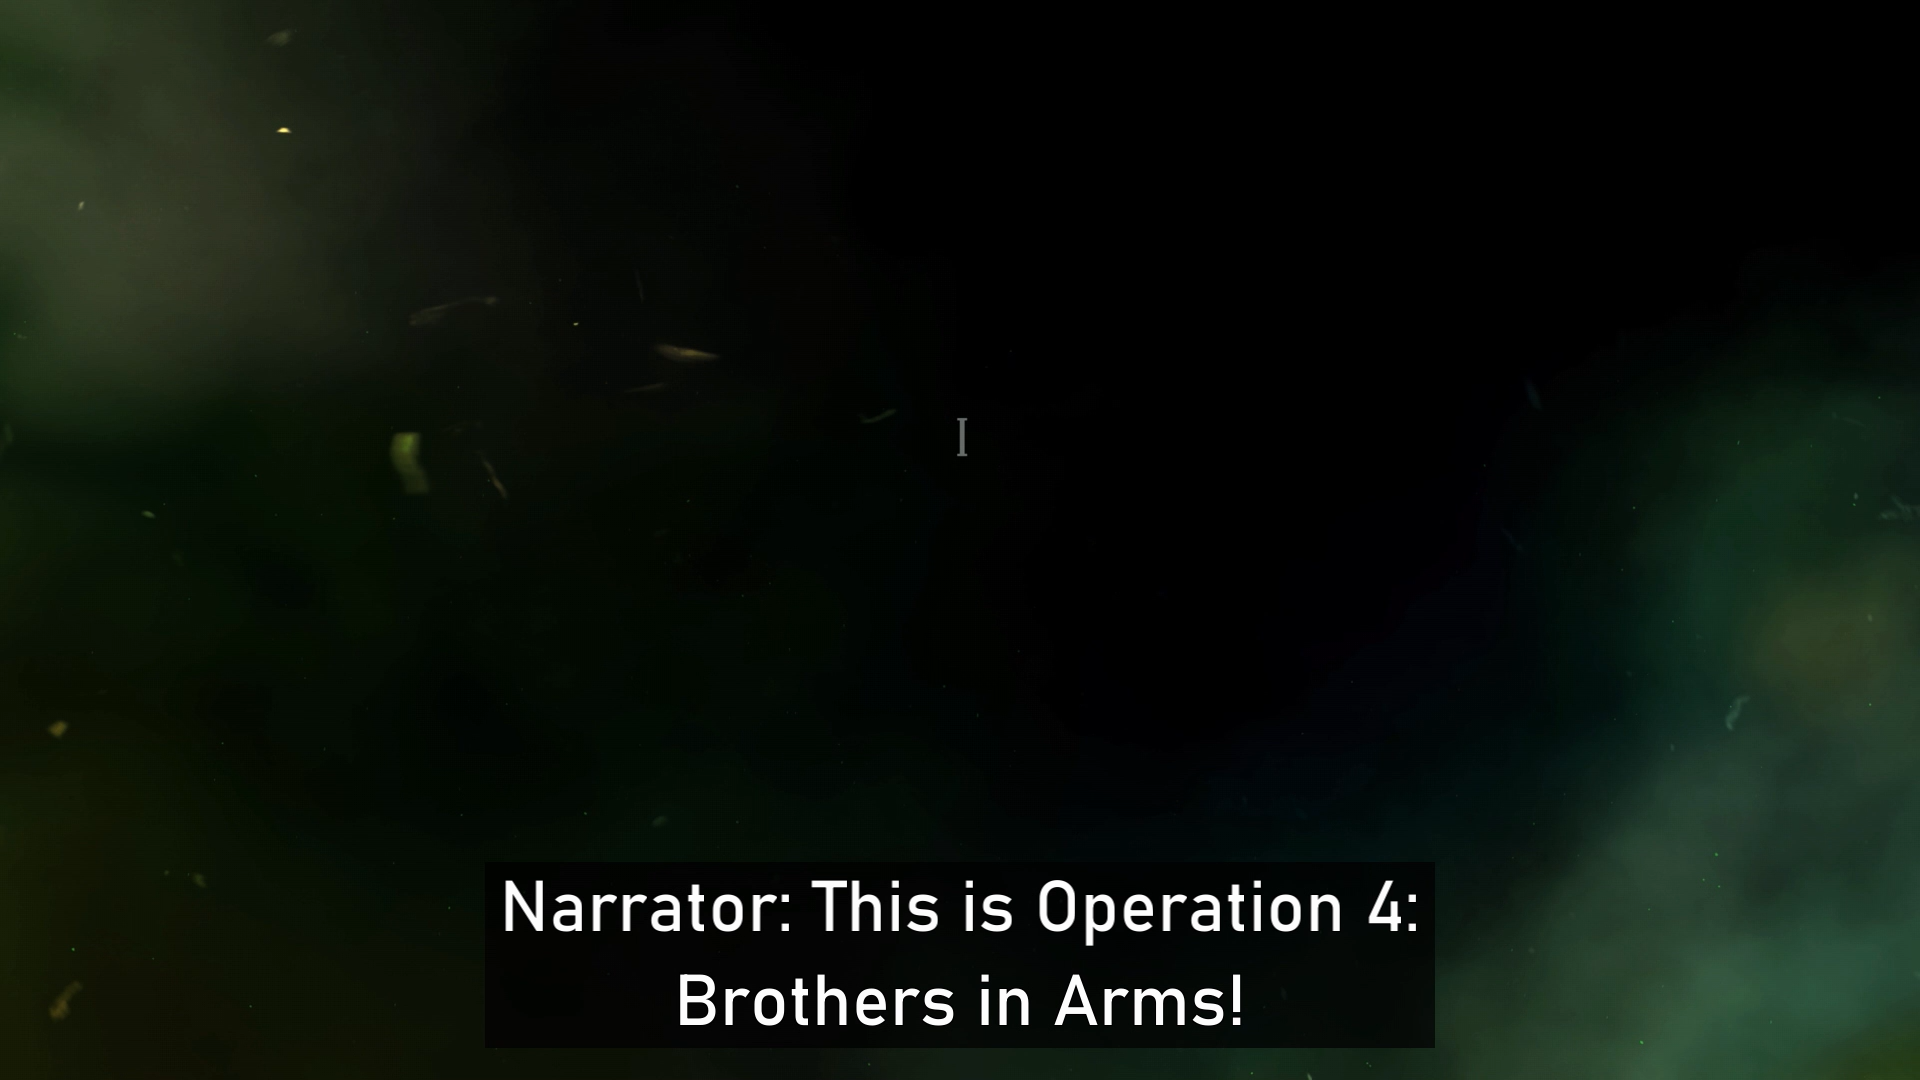 A still from a Gears 5 trailer. The screen is black with fog in the bottom corners and the subtitle says, "Narrator: This is Operation 4: Brothers in Arms!"